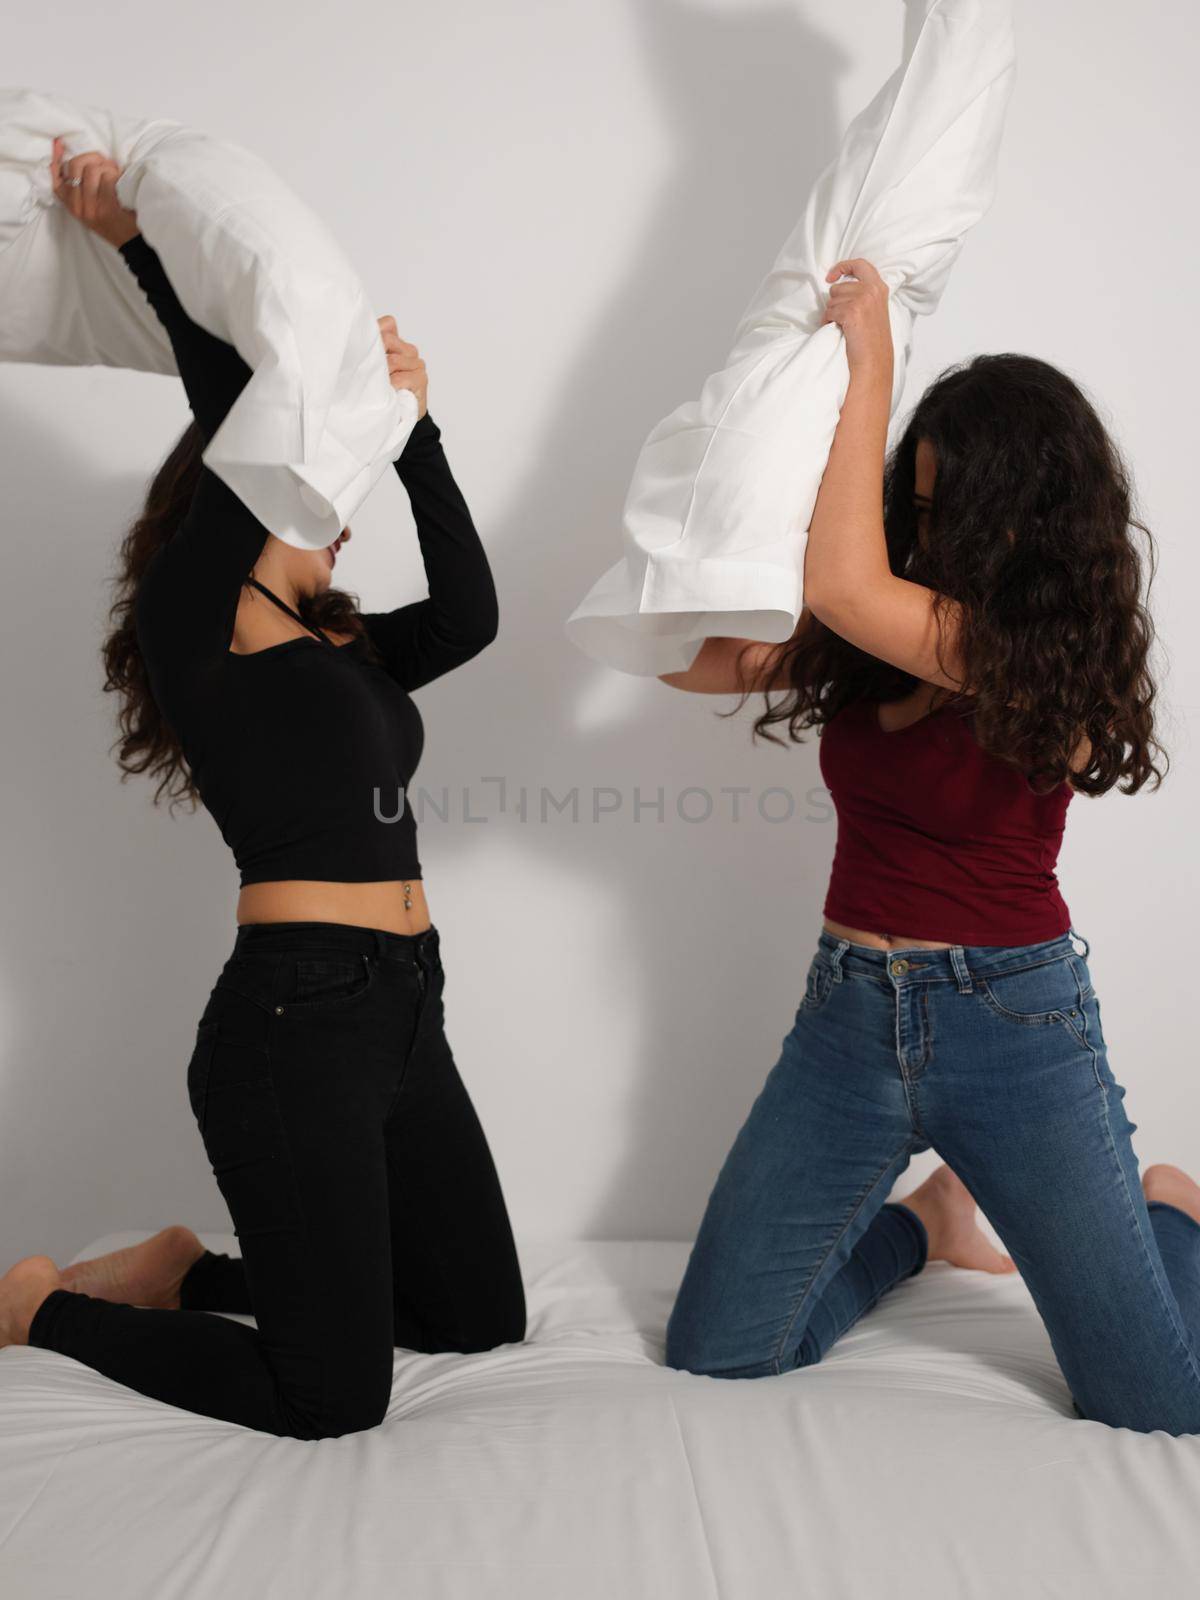 Vertical image of two latin girls playing pillow fight in bed.